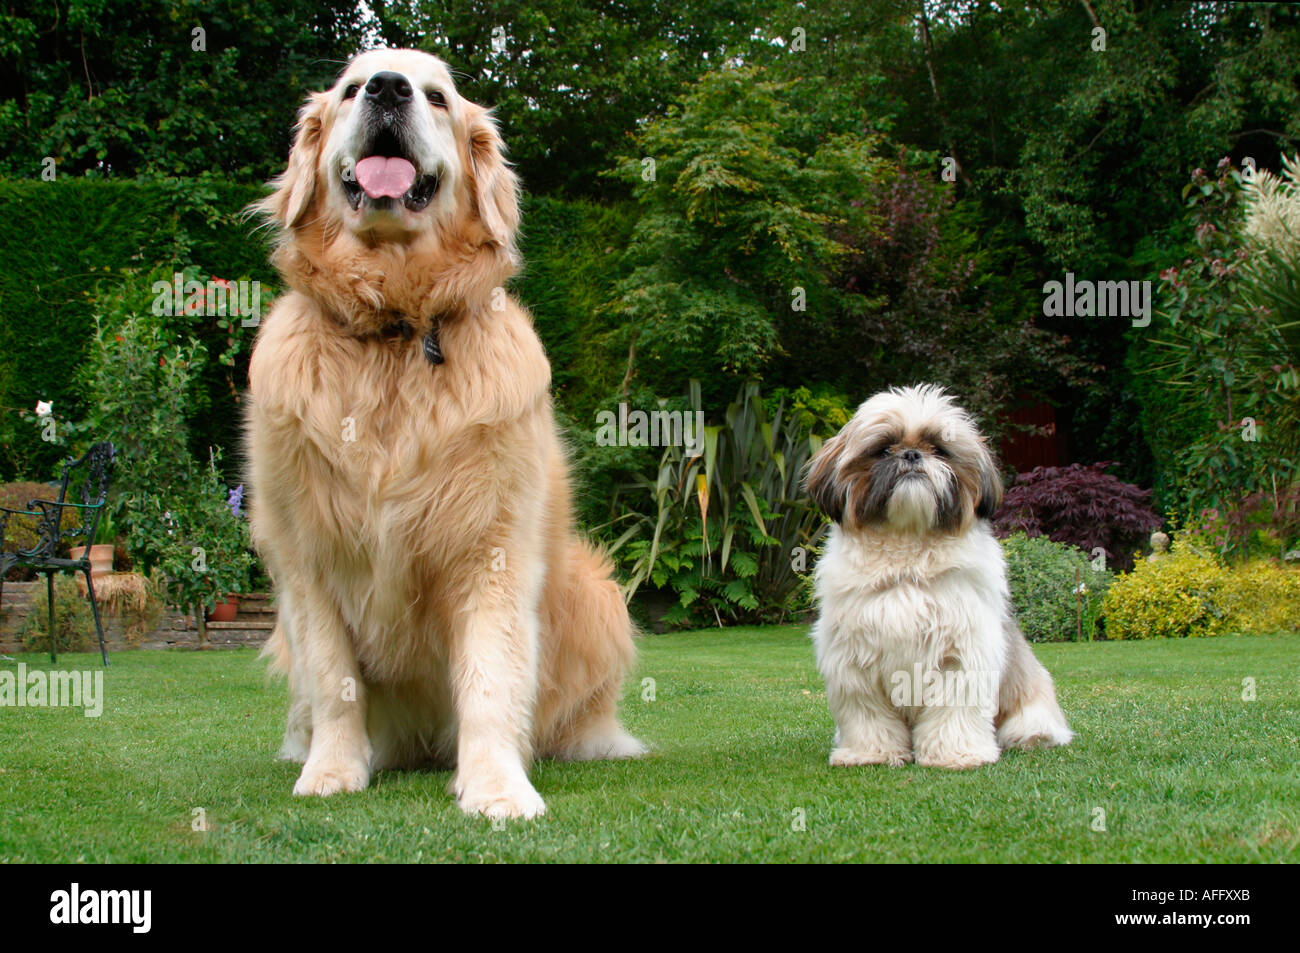 Golden Retriever and Shitzu dogs sitting side by side in the garden Stock Photo